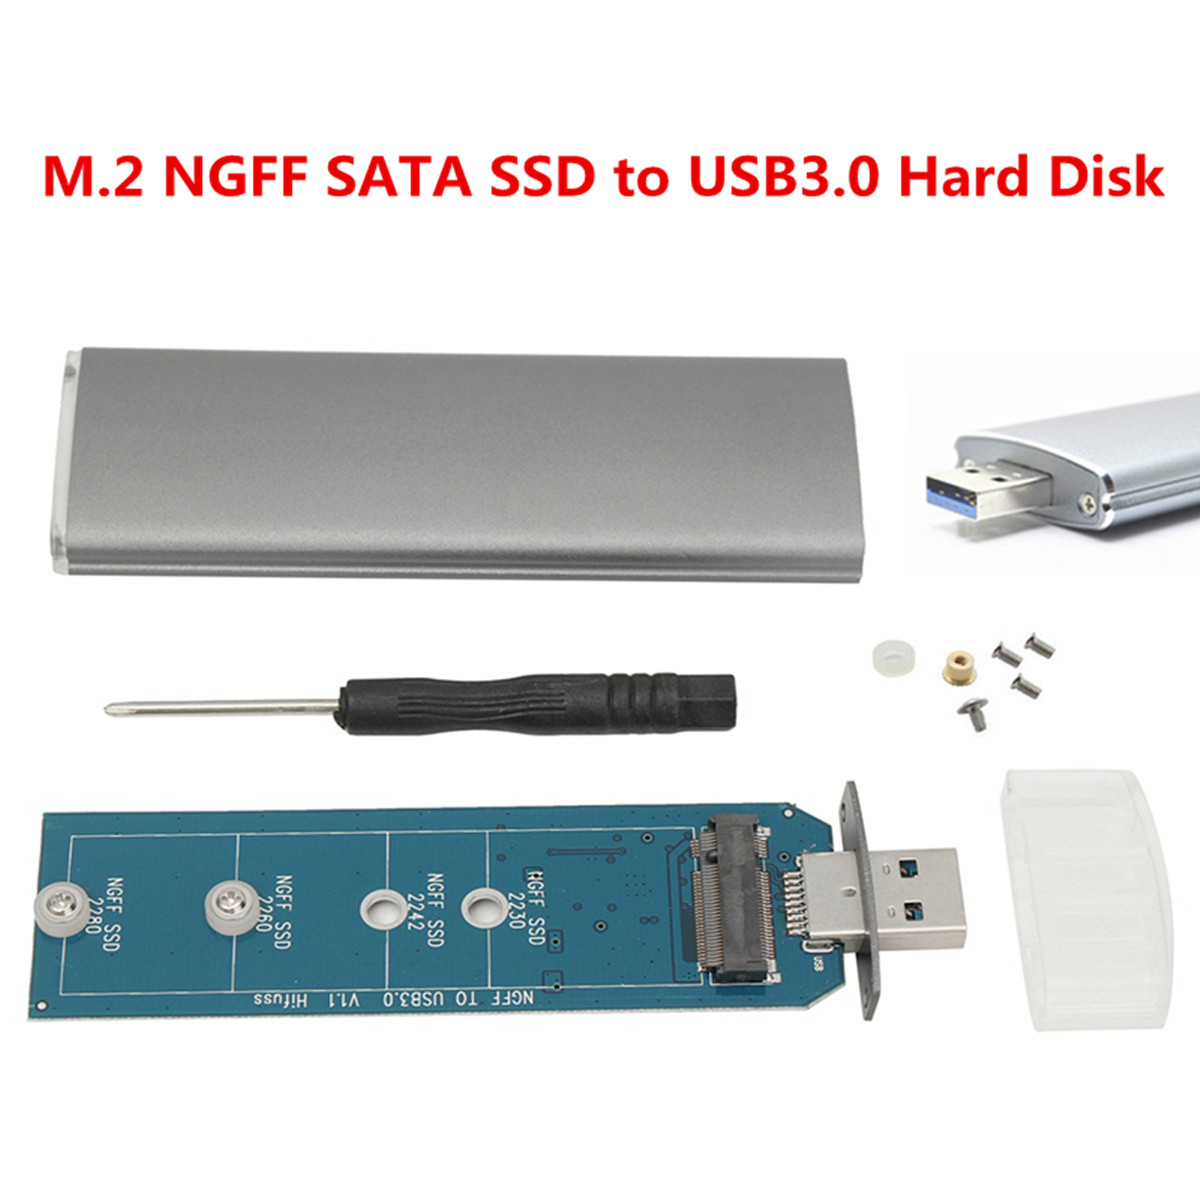 M.2 NGFF SSD SATA to USB 3.0 Converter Adapter External Enclosure Mobile SSD Case 67